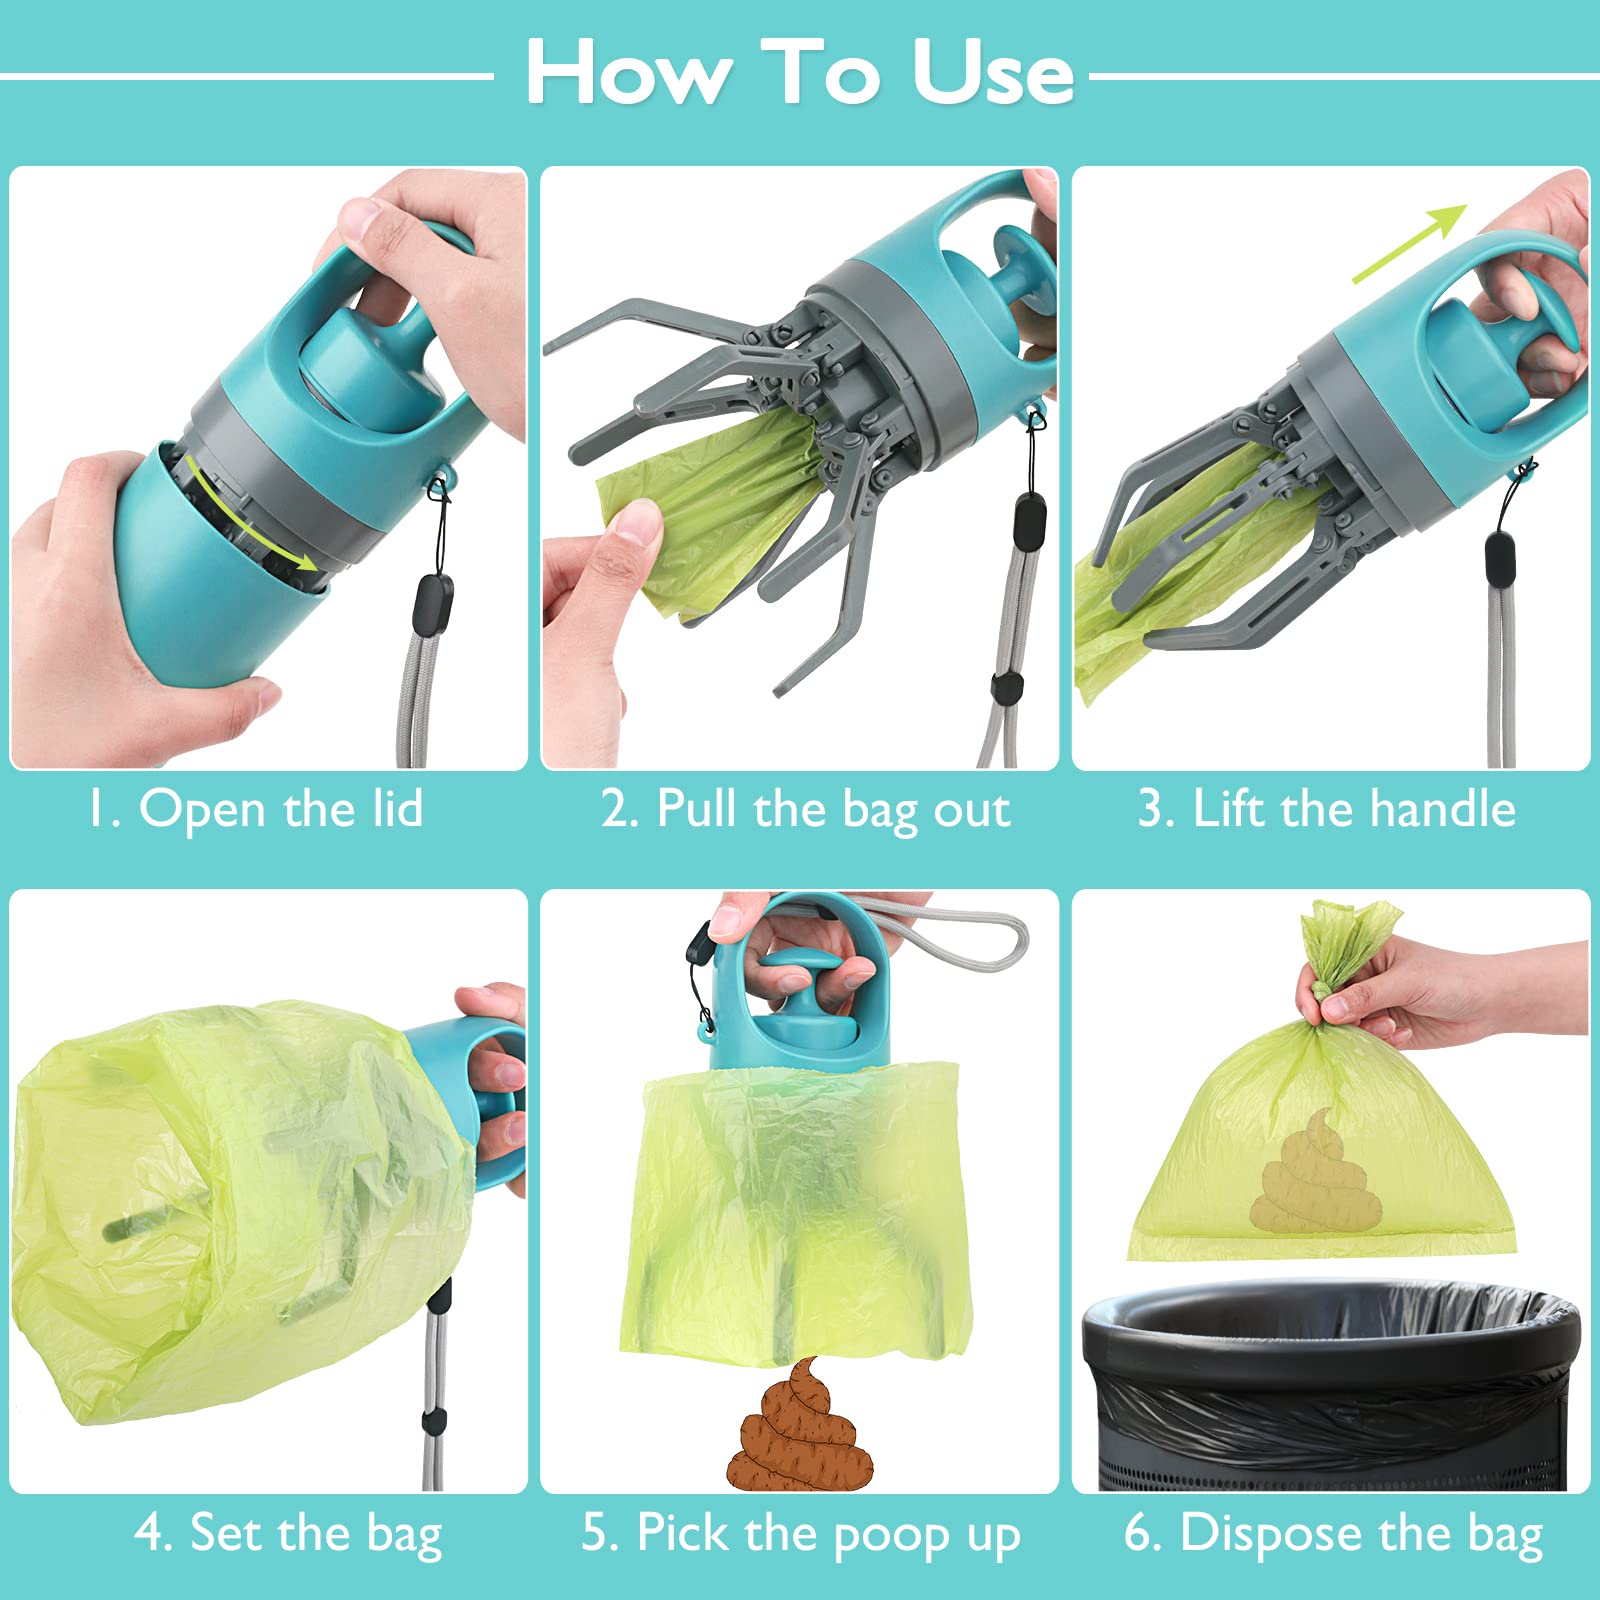 Portable Dog Poop Scooper, Sanitary Dog Waste Picker Upper With Bag Dispenser, Convenient Pet Waste Cleaner For Dog Walkers, Attachable To Dog Leash, Harness Or Waist